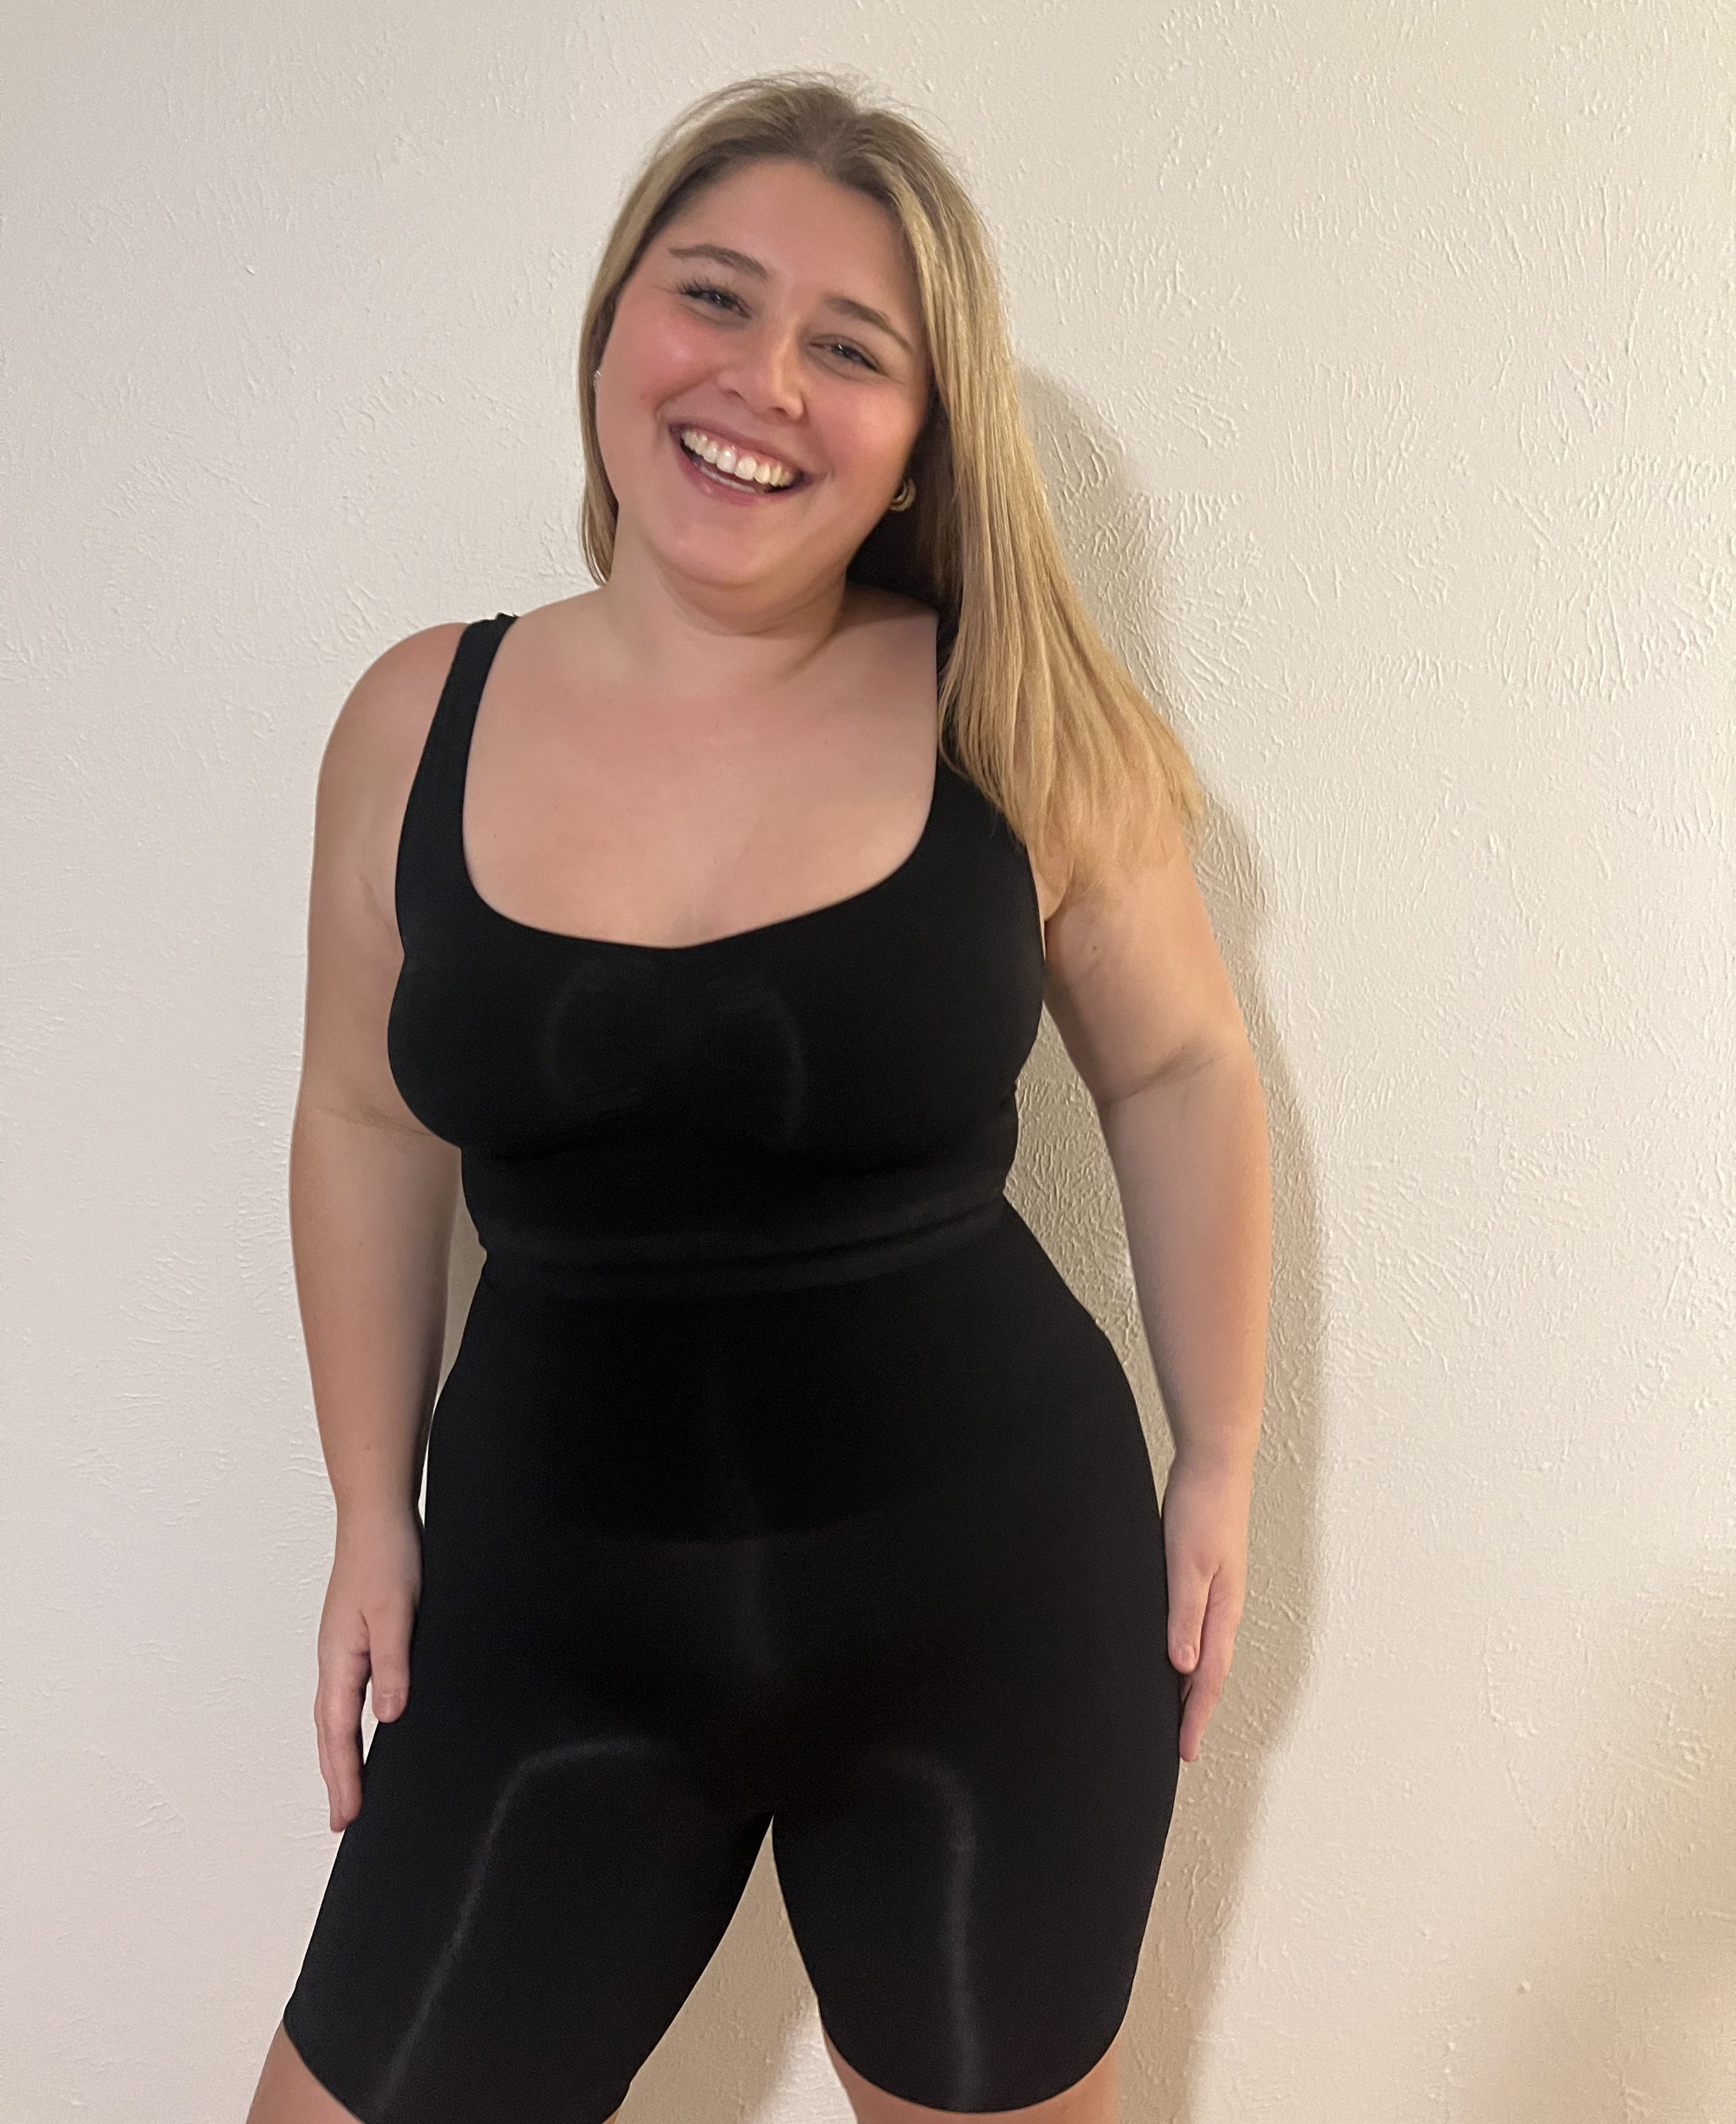 Yitty vs. Spanx: Which Shapewear is Right For You?